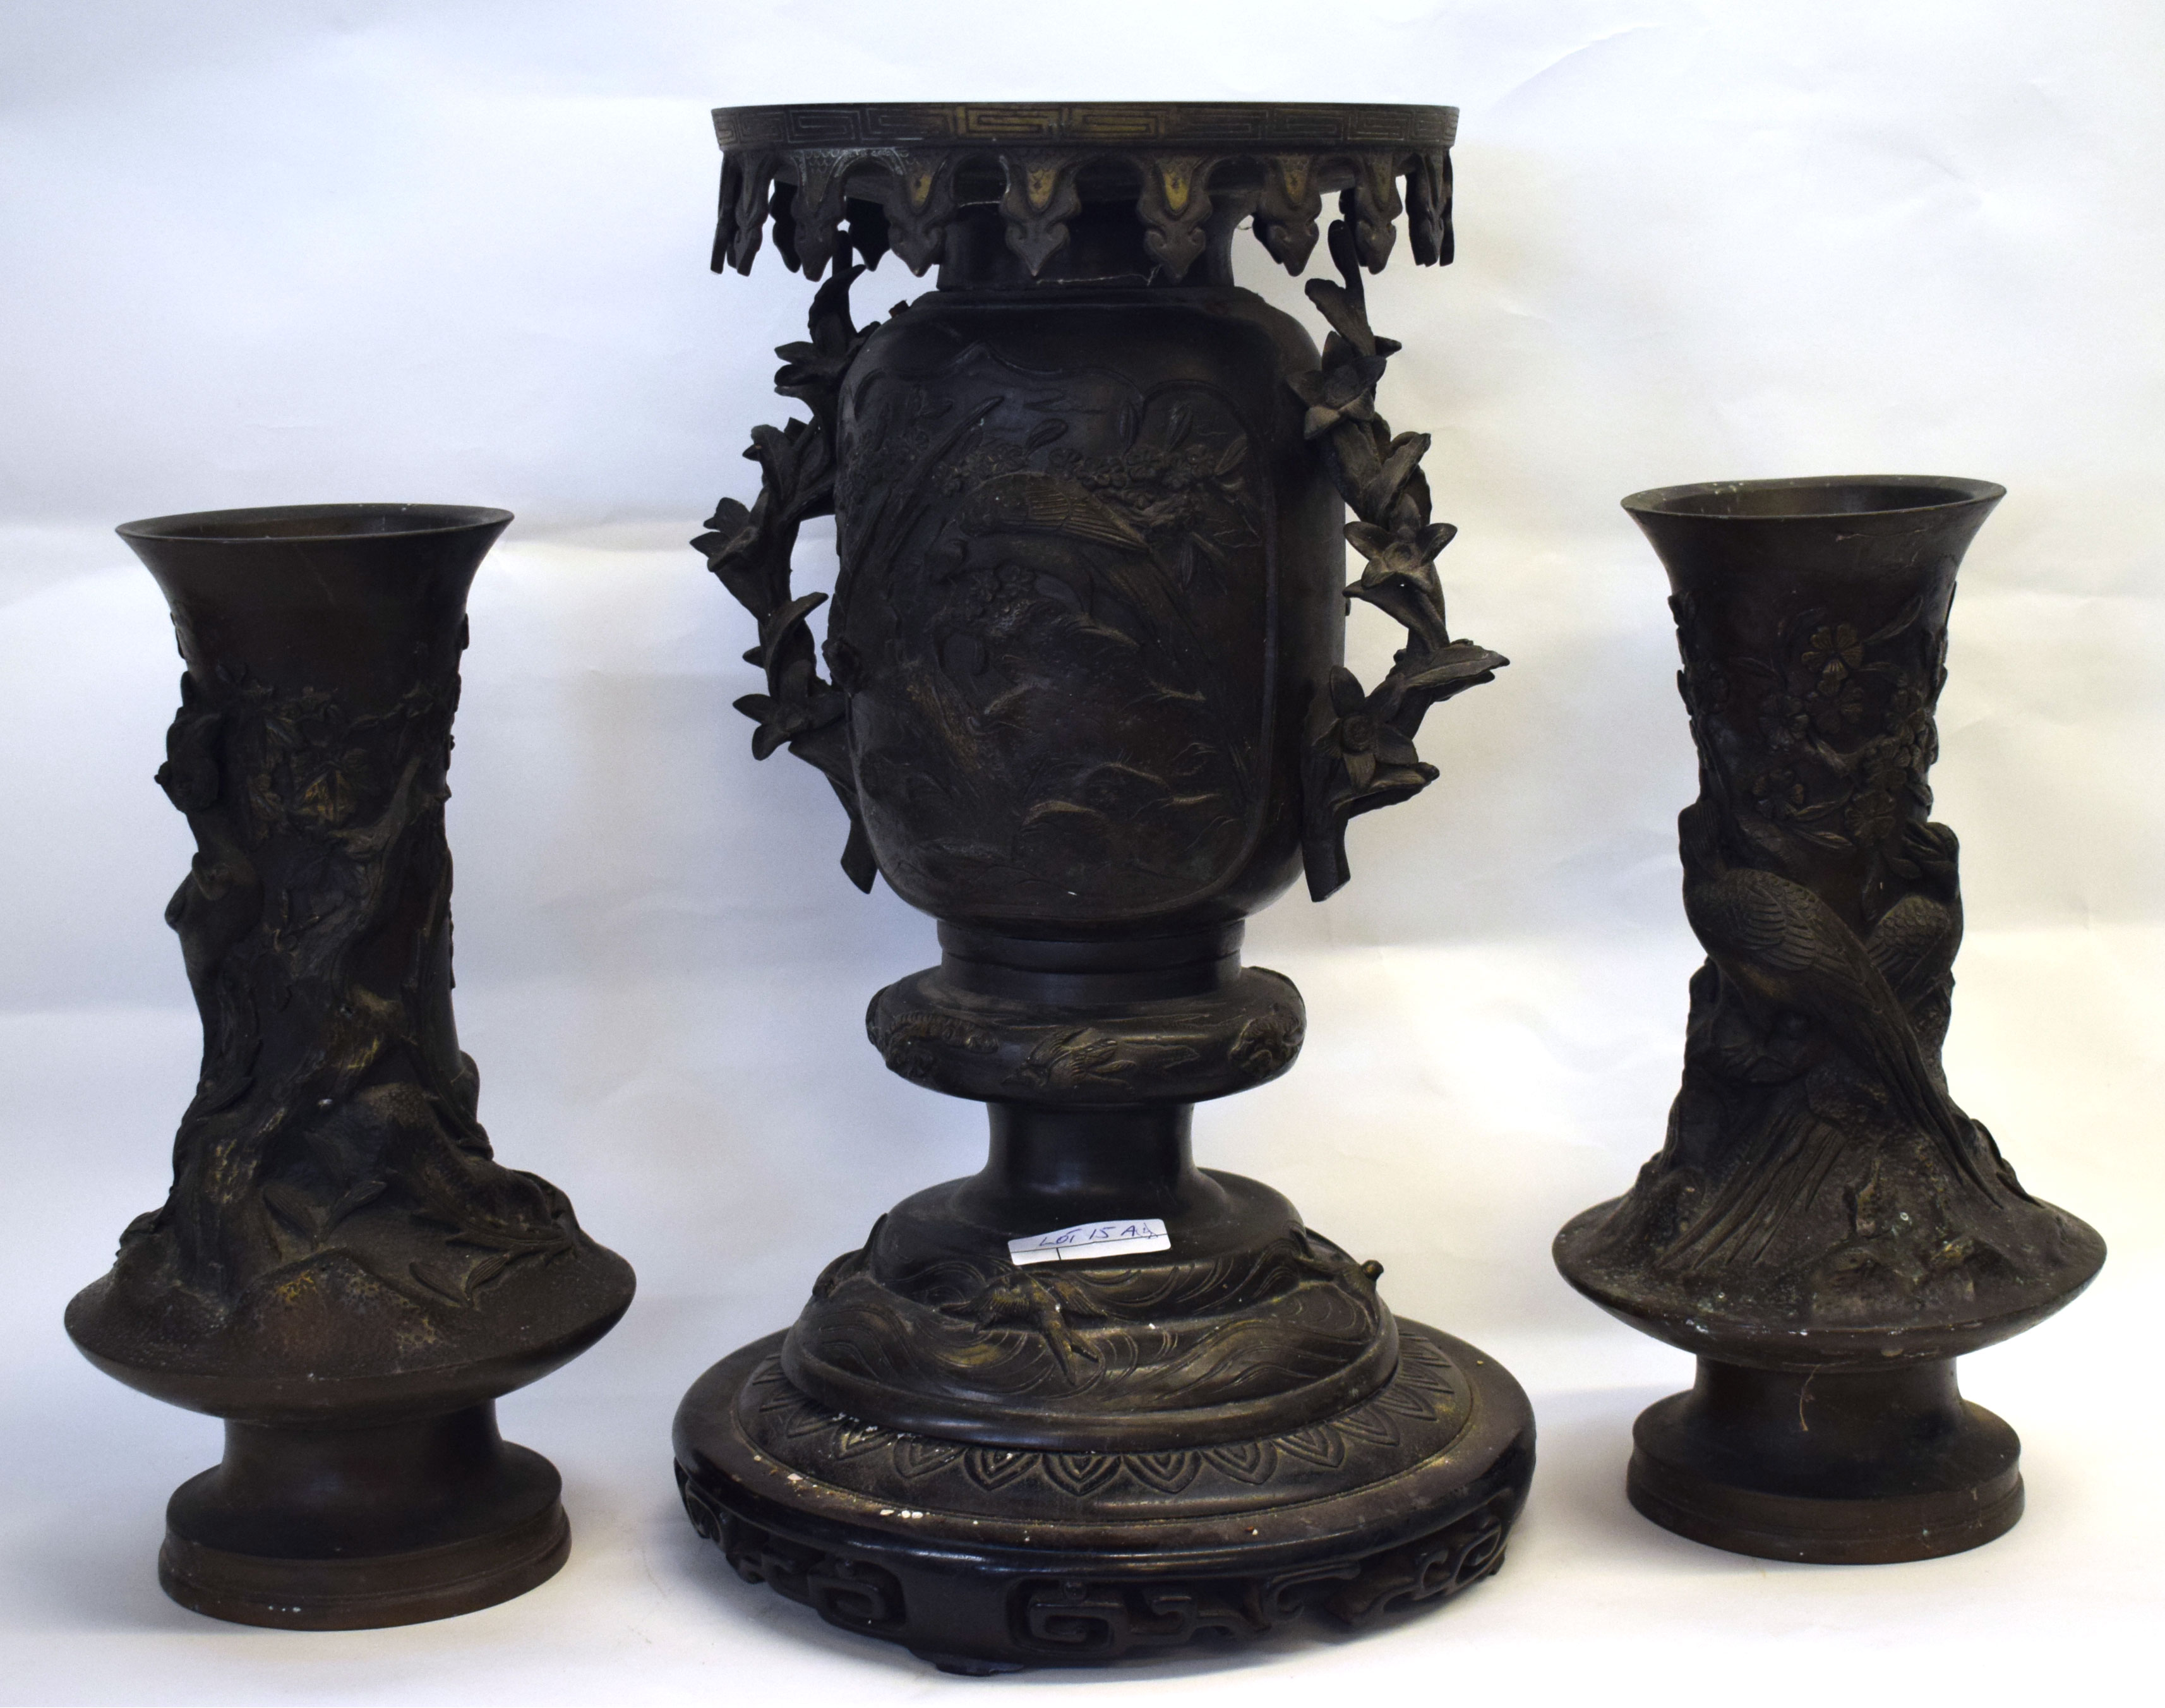 Group of 3 Oriental bronze vases, probably Japanese, 2 with birds around the neck with floral